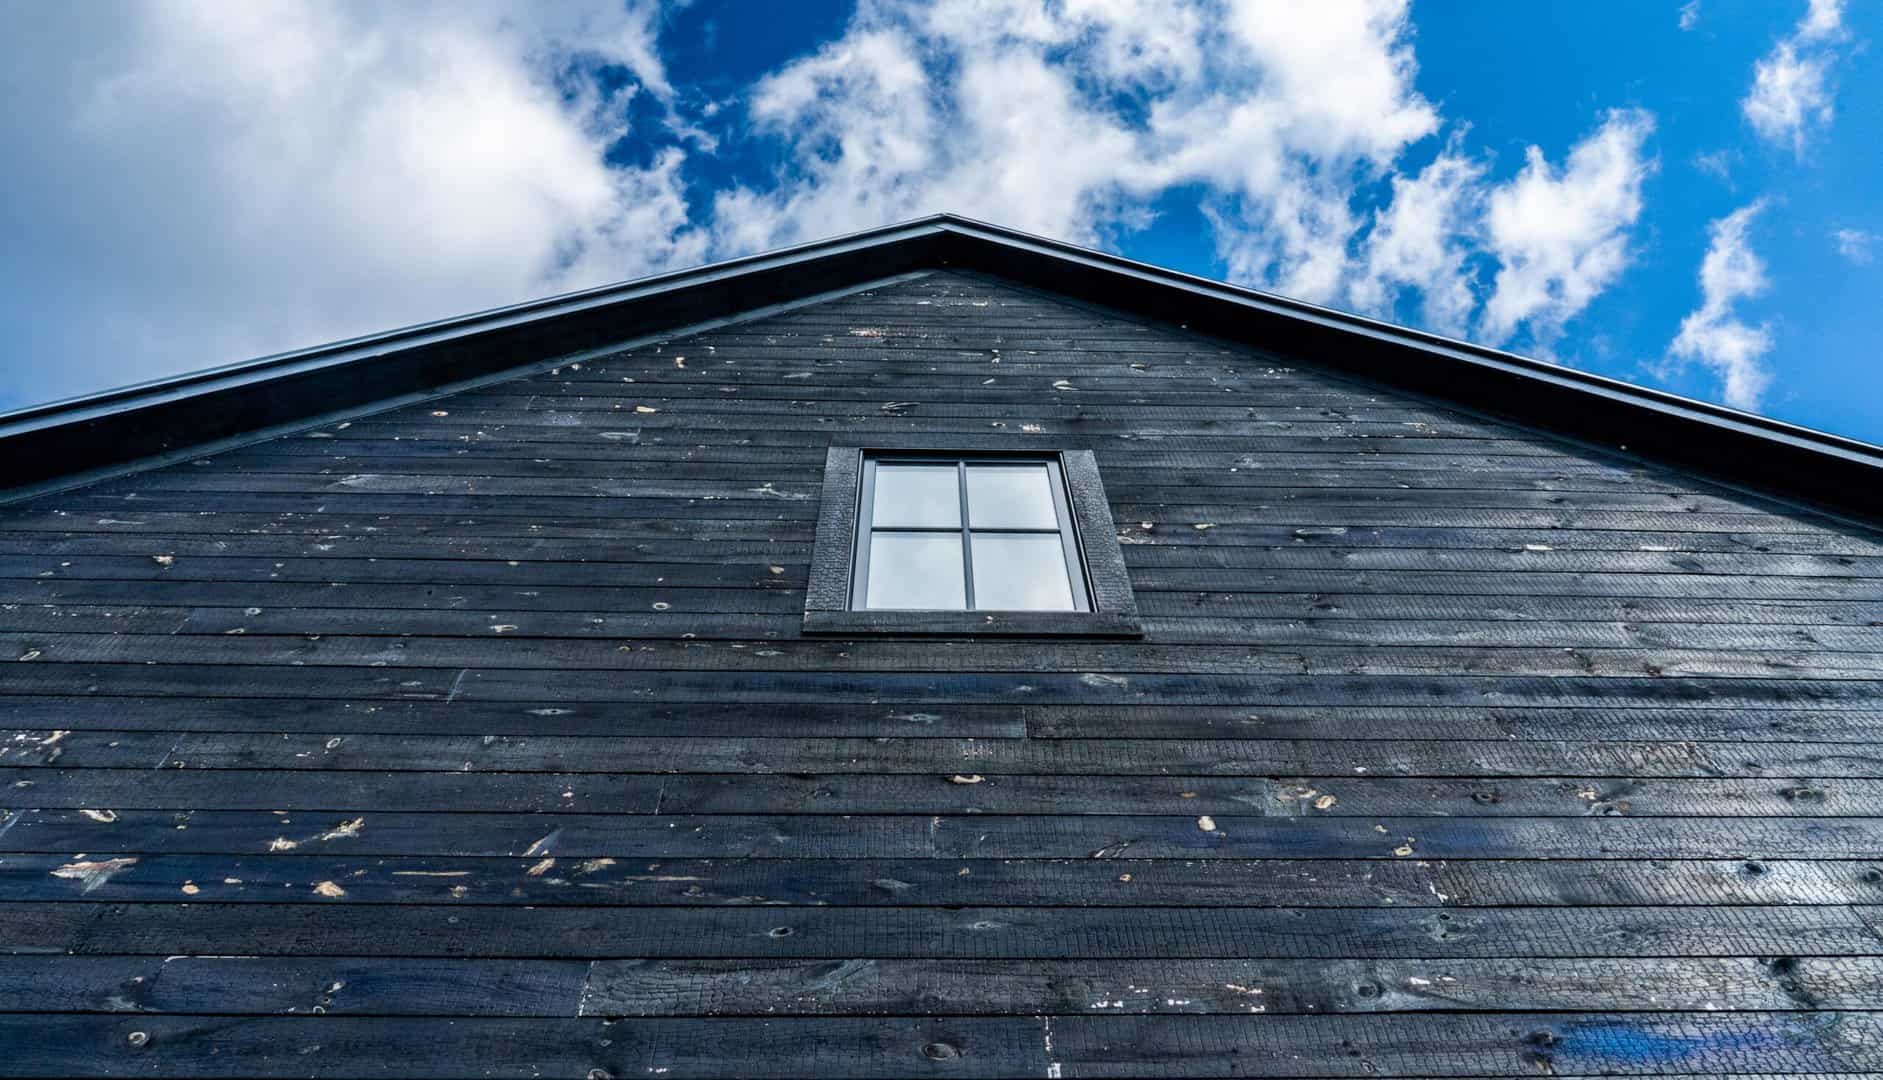 close up cropped image St. Paul Home with painted dark wood siding with roof peak against blue sky with white clouds